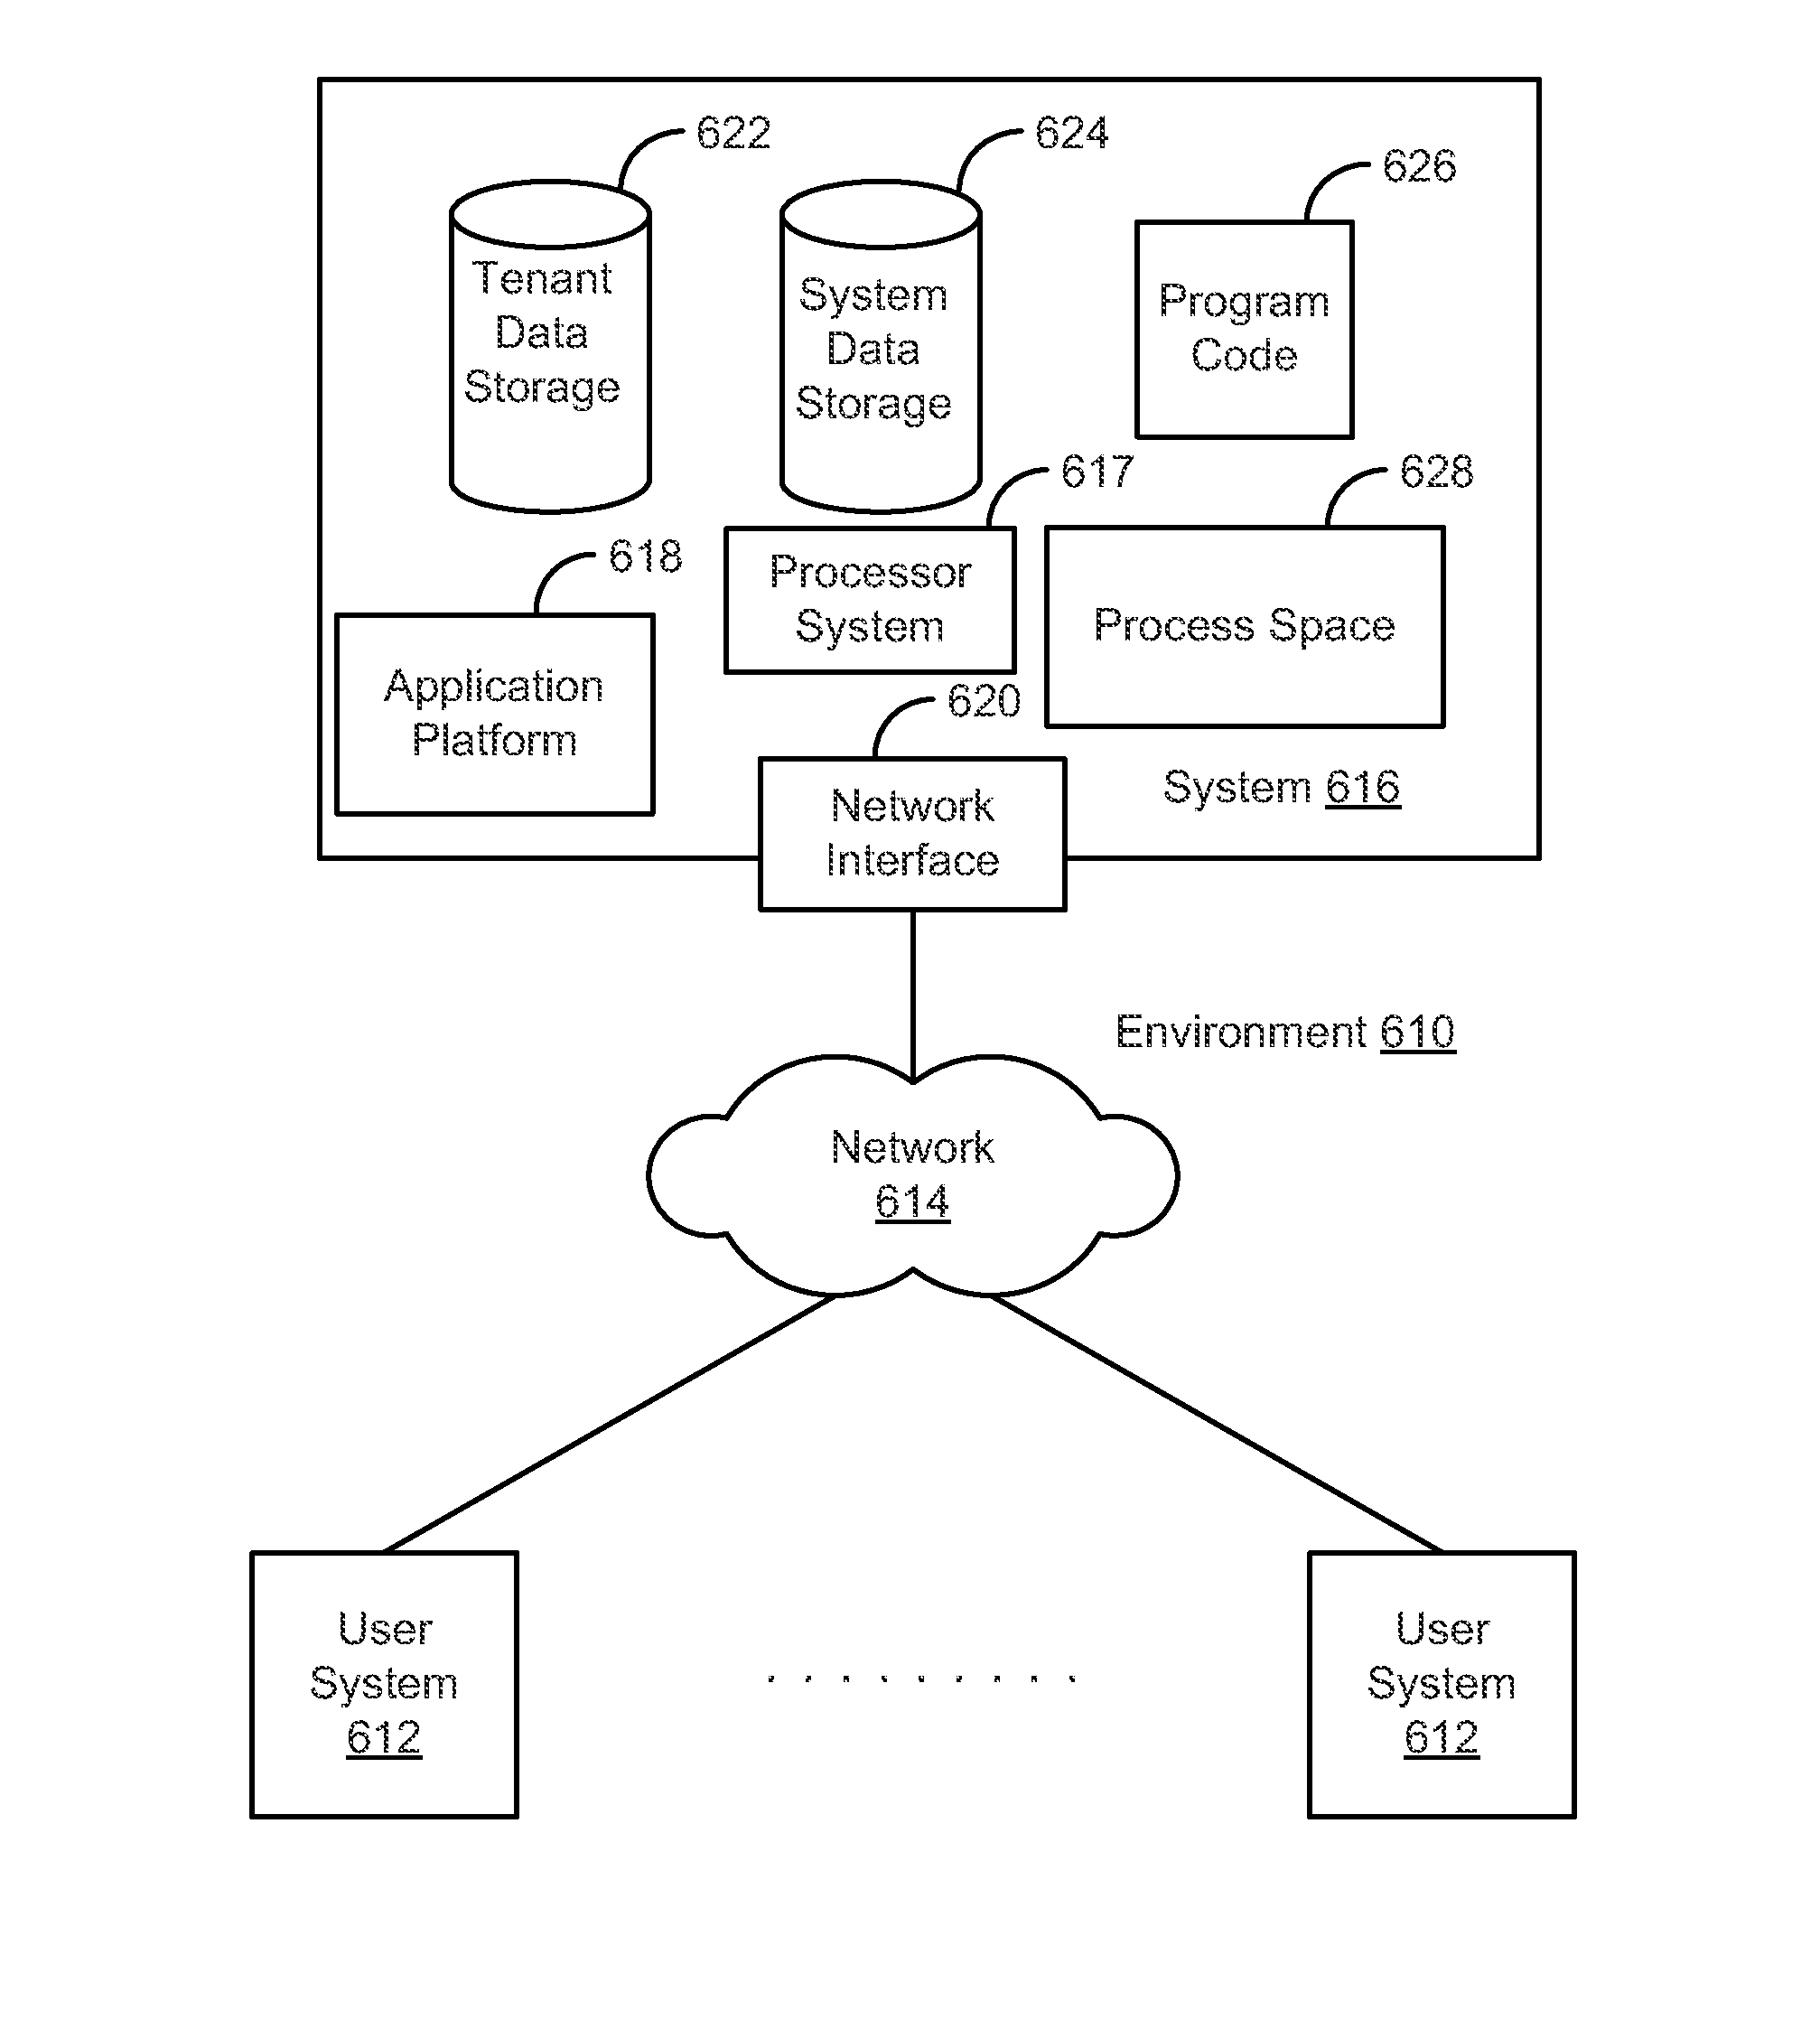 System, method and computer program product for transferring a website state across user devices using a cookie